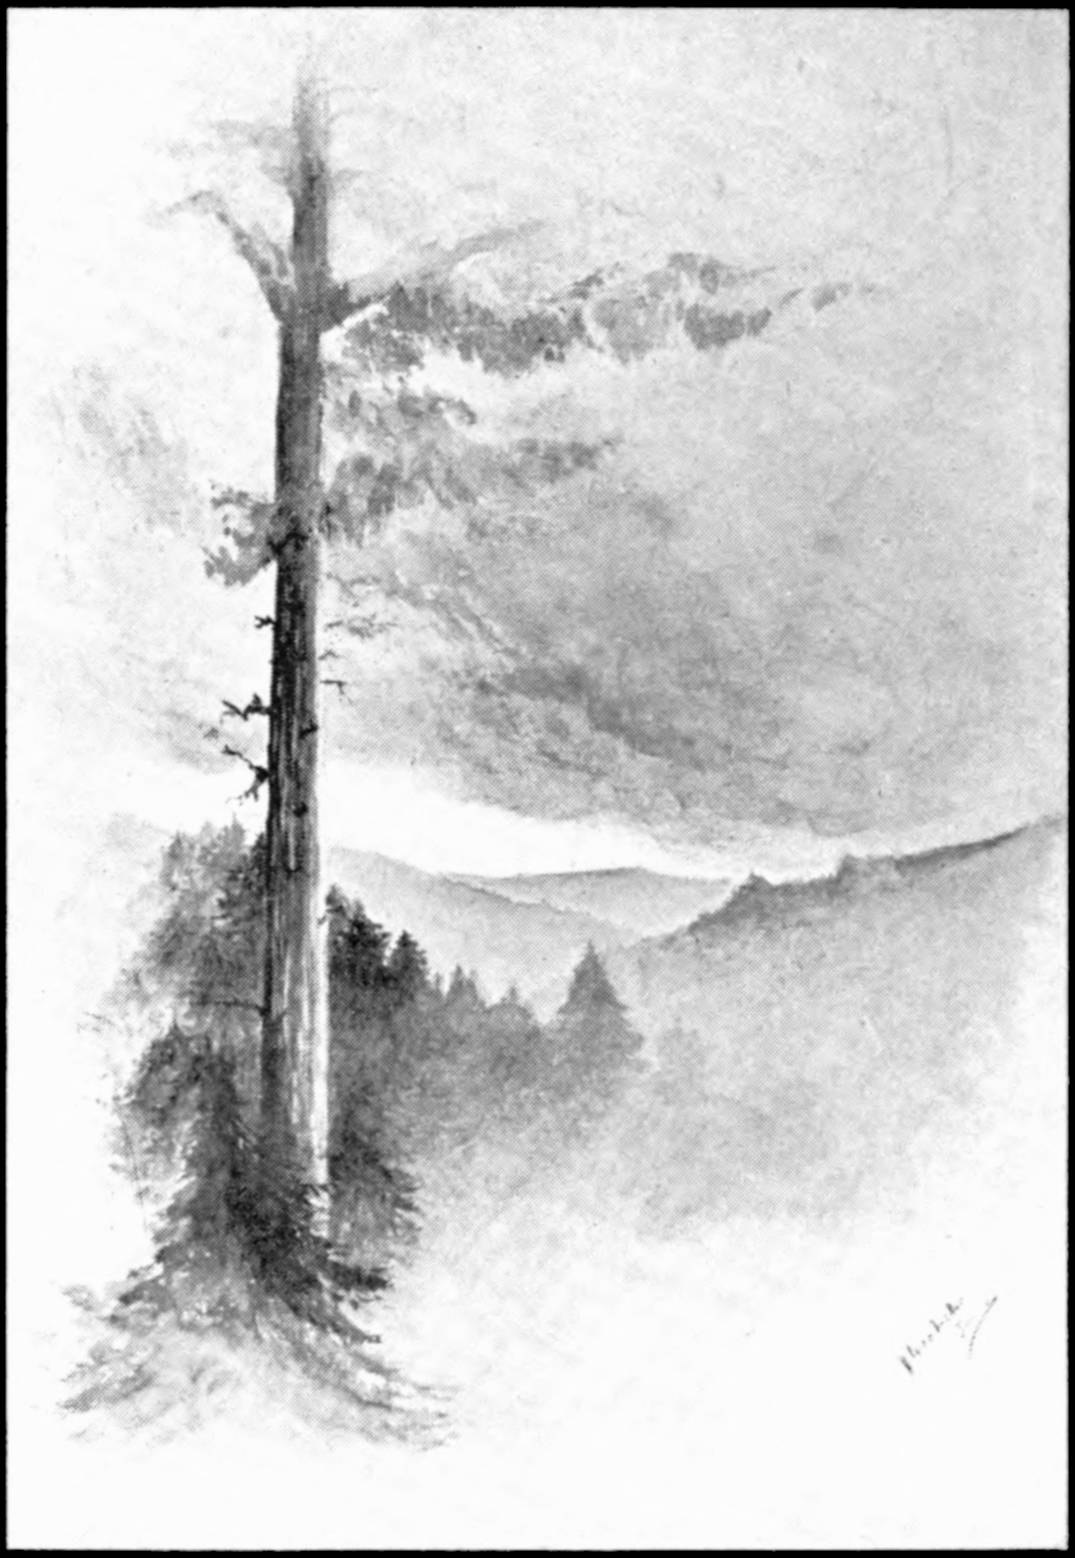 Sketch of a wooded landscape of evergreens on hills, with many clouds in the sky. A very tall evergreen is in the foreground on the left, towering over all of the smaller trees.